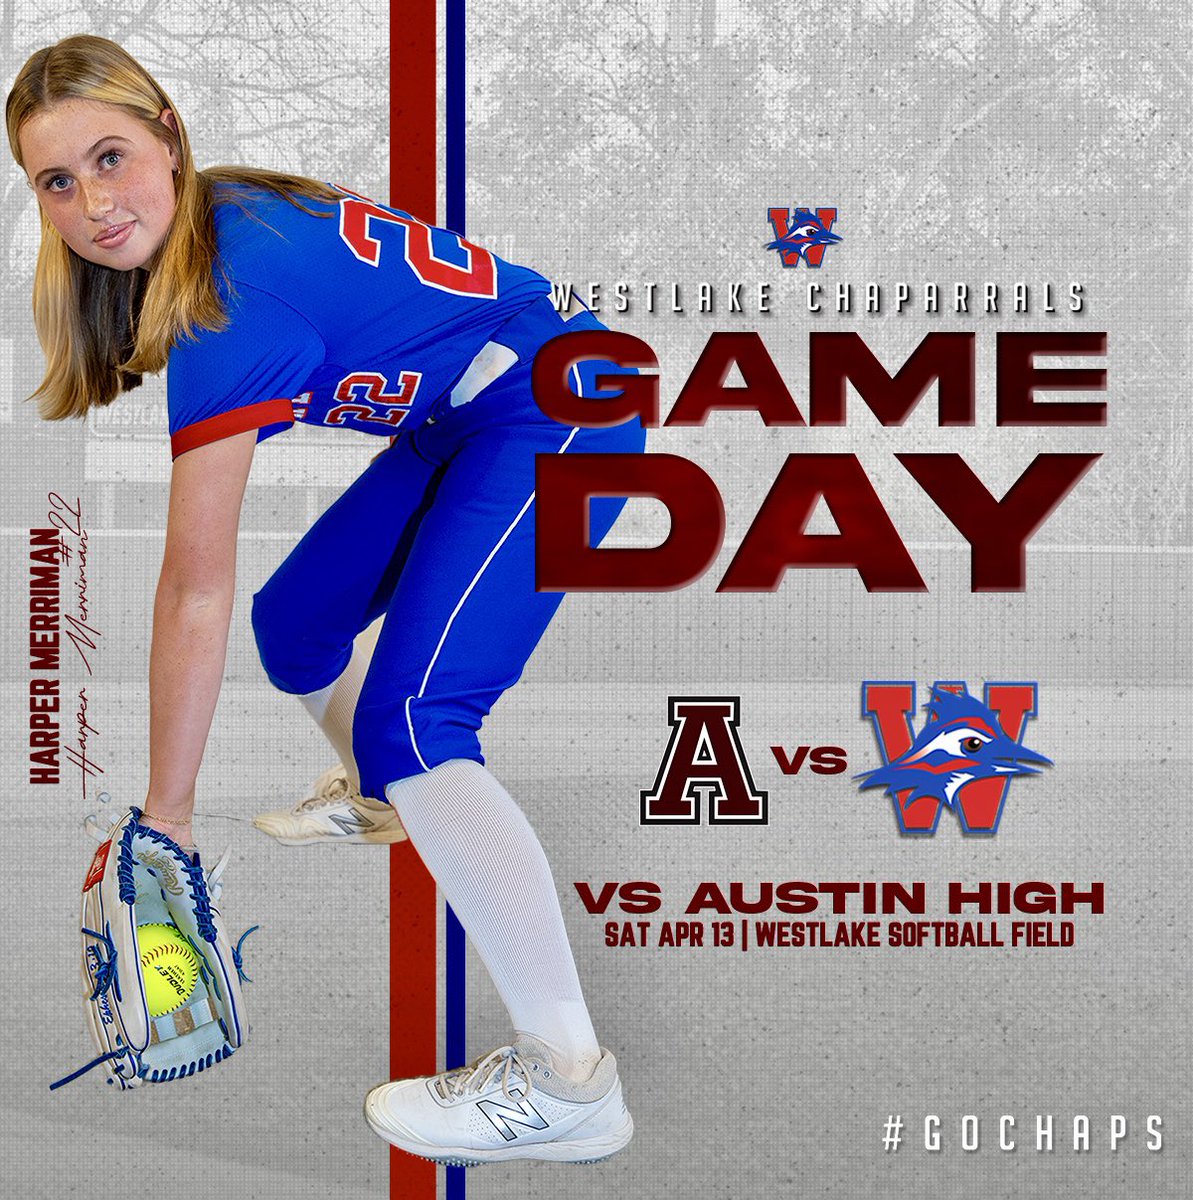 Softball gets right back on the diamond following Friday night’s road loss to Dripping Springs as the Chaps take on Austin High. First pitch is set for 1:30pm. #GoChaps